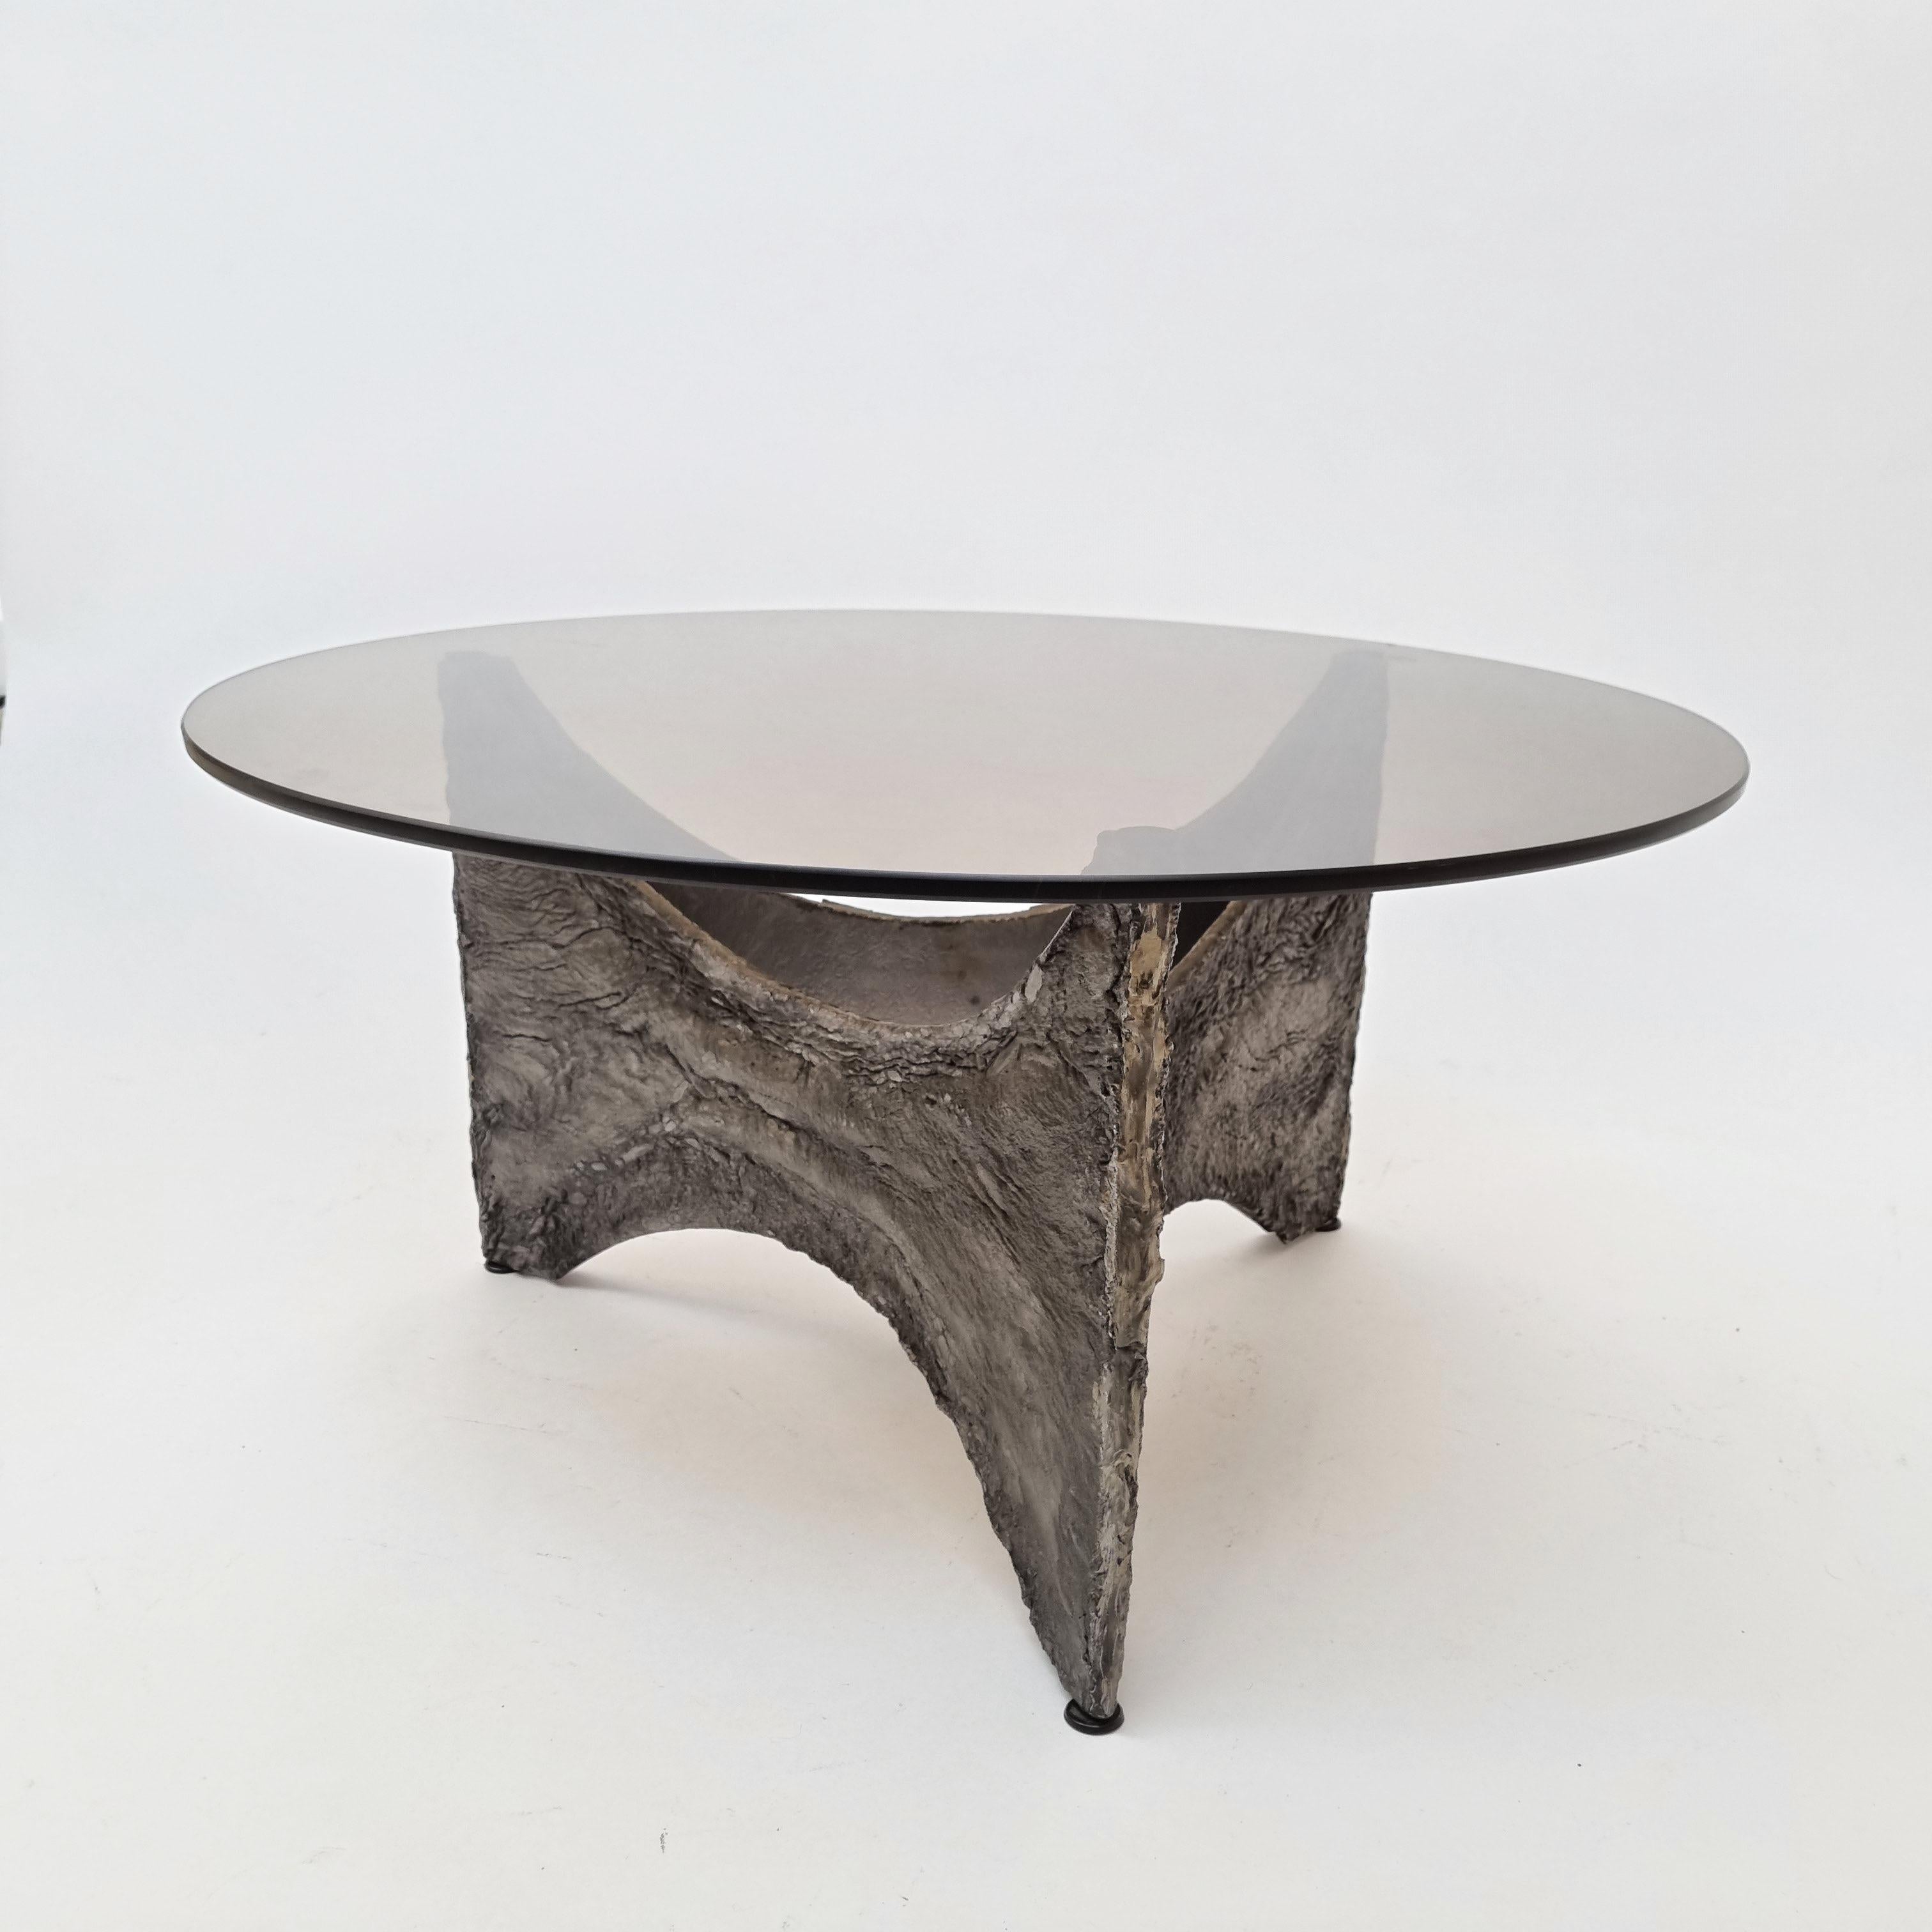 This Brutalist coffee table is made in a style reminiscent of designs by Paul Evans. It was manufactured in Belgium, circa 1960. The table base is composed of cast aluminum with a rough texture. The top is made of smoke glass, revealing the shape